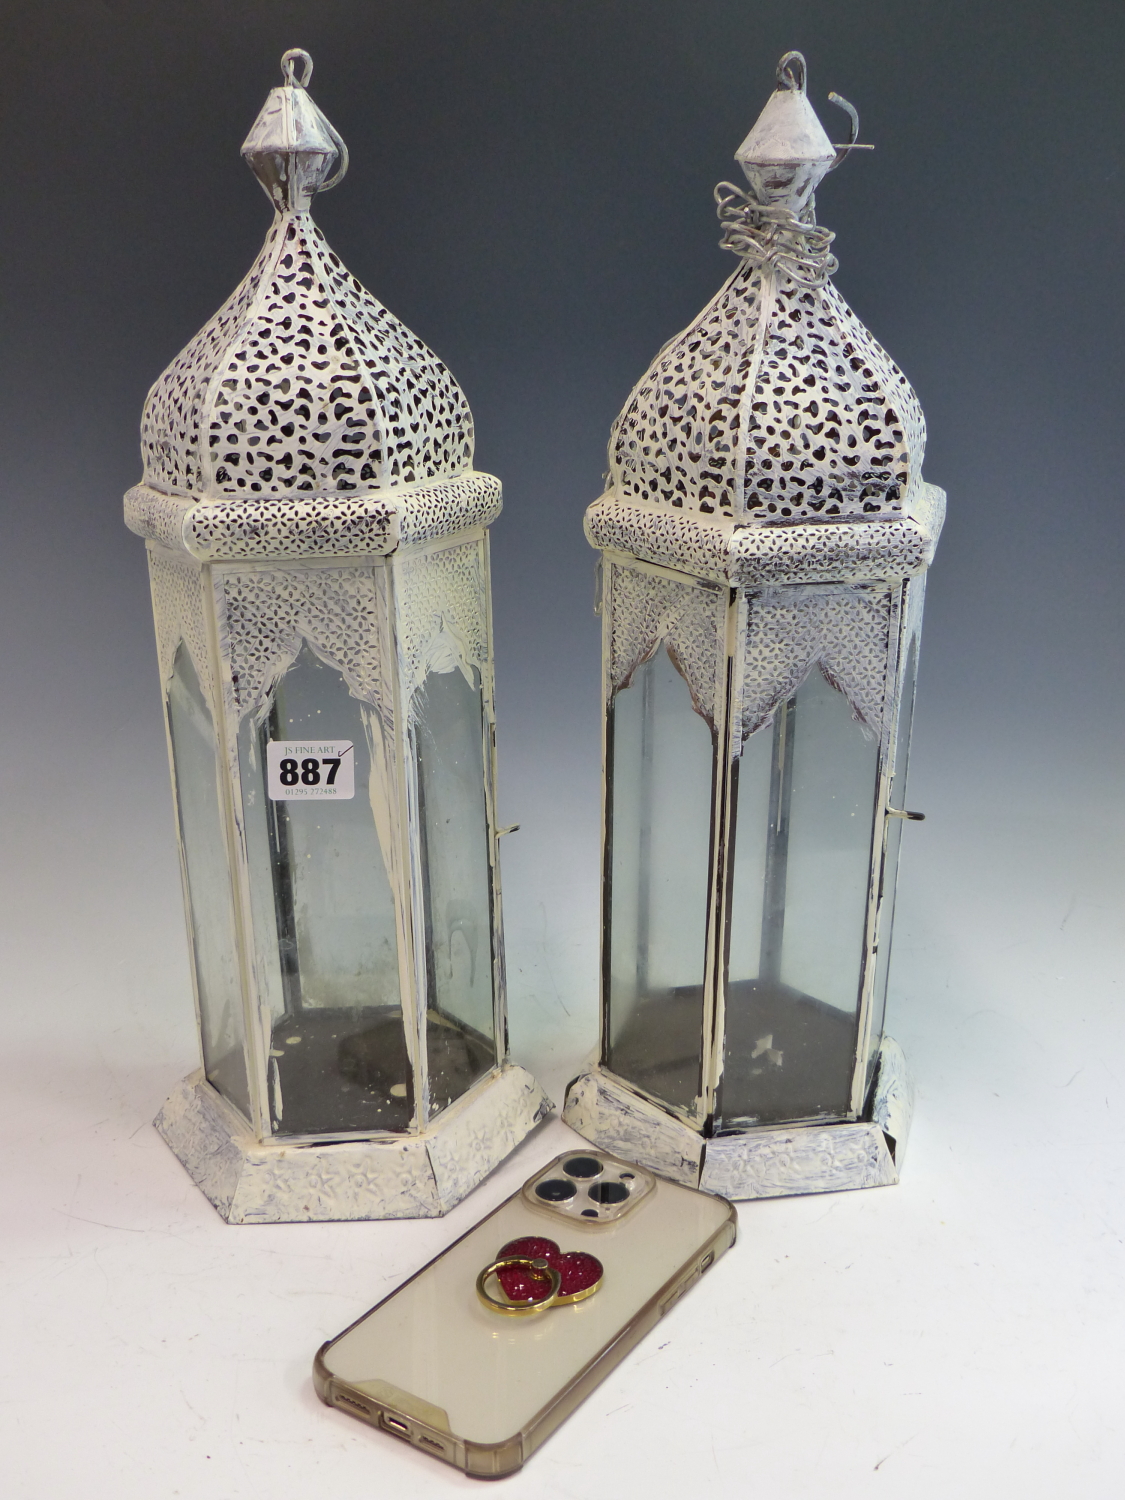 A PAIR OF PAINTED GLAZED HANGING CANDLE LANTERNS. - Image 2 of 2